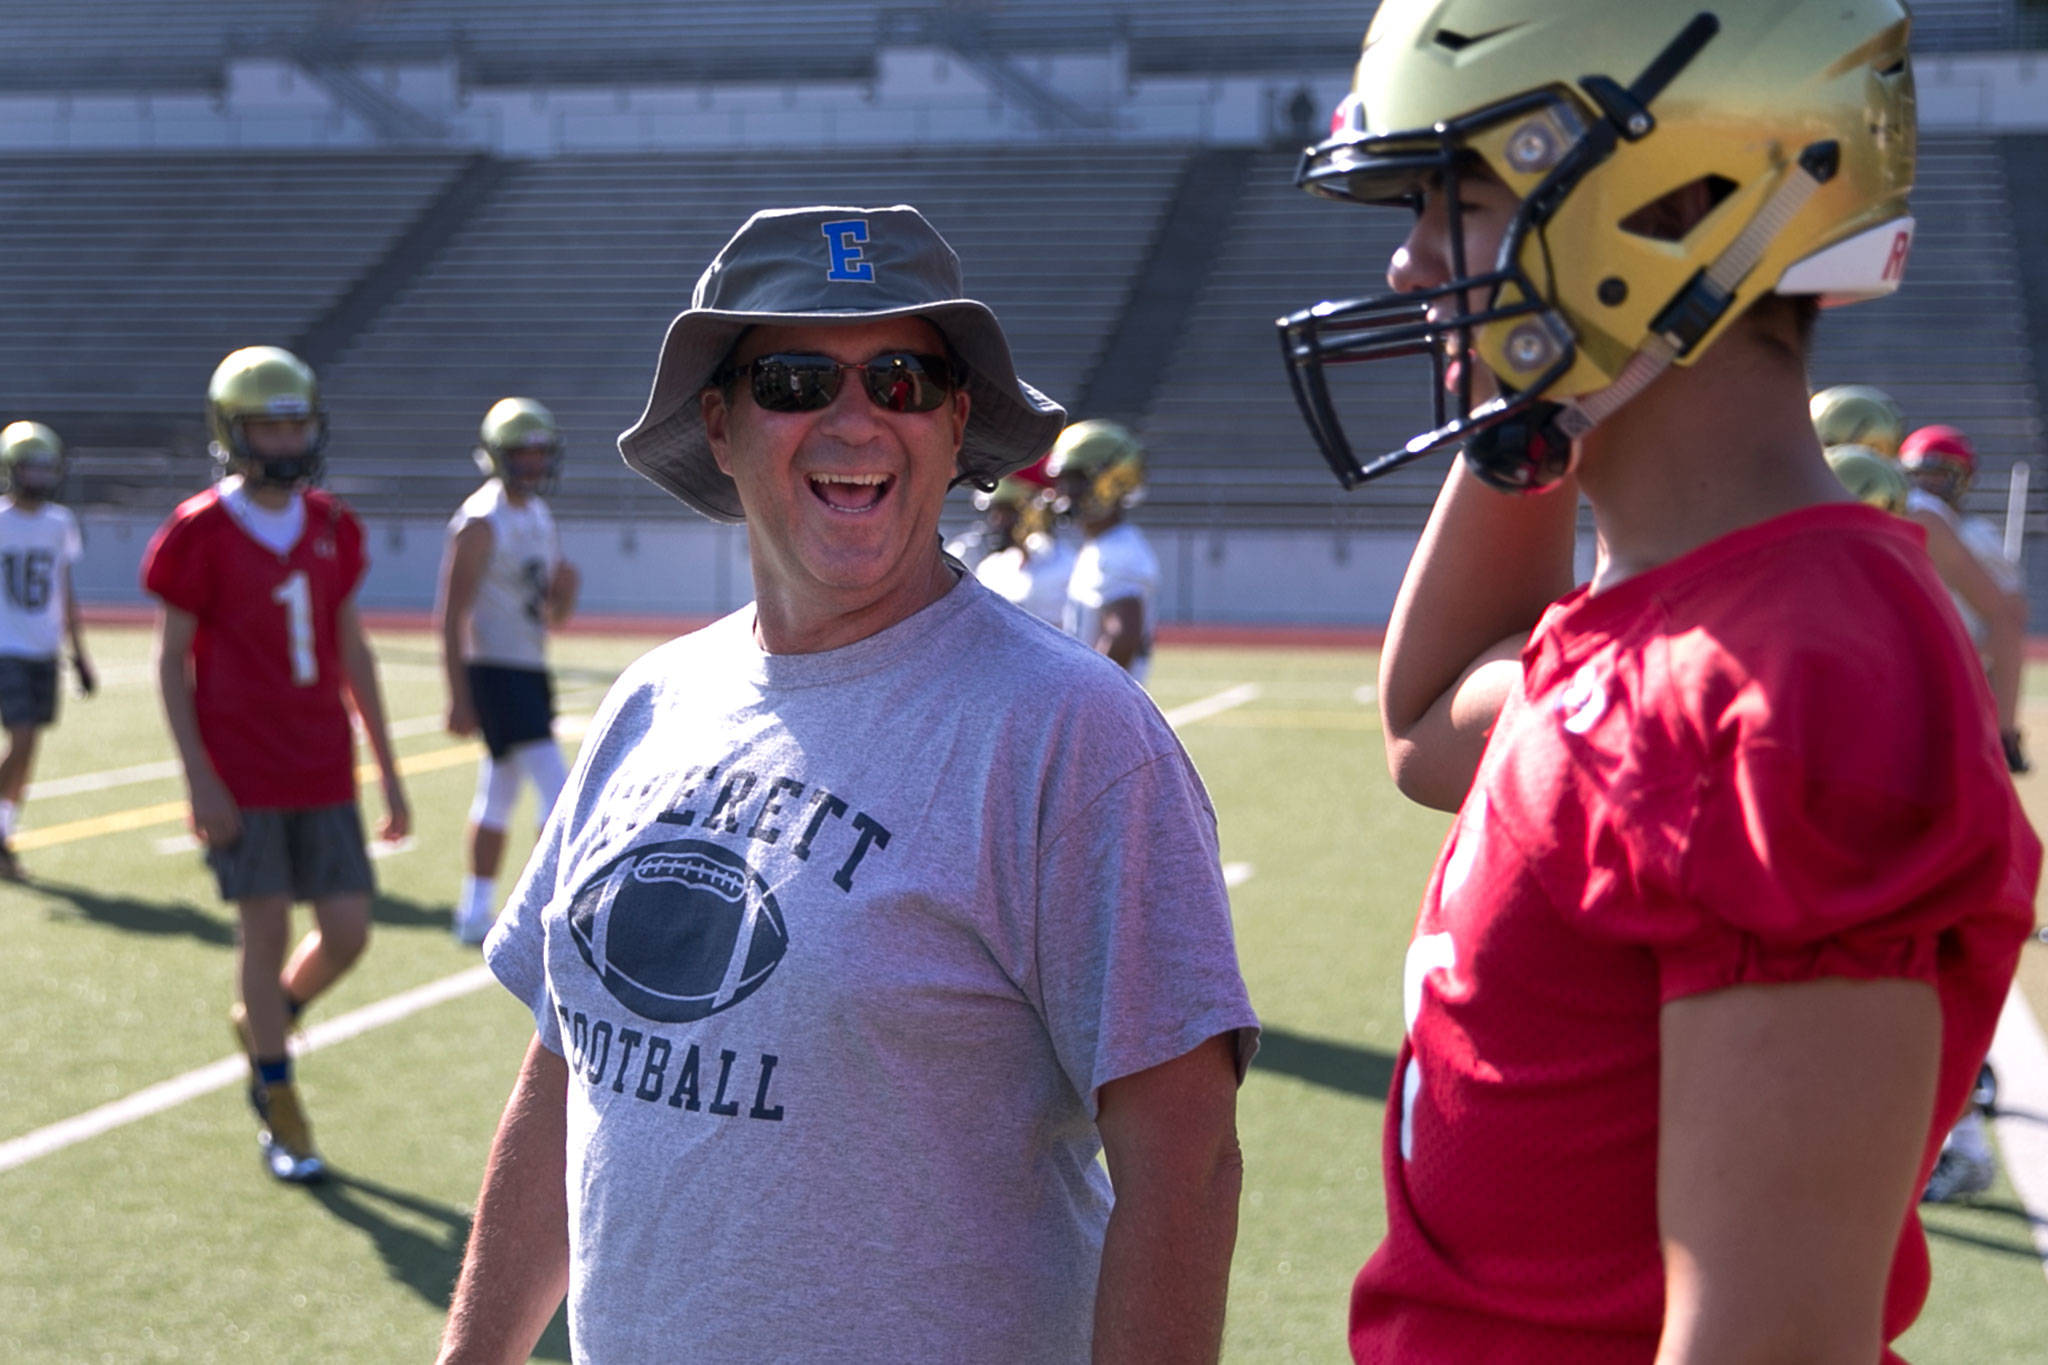 Everett coach David Coldiron (left) shares a laugh with quarterback Ethan Ollis during practice on Aug. 17, 2018, at Everett Memorial Stadium. (Kevin Clark / The Herald)